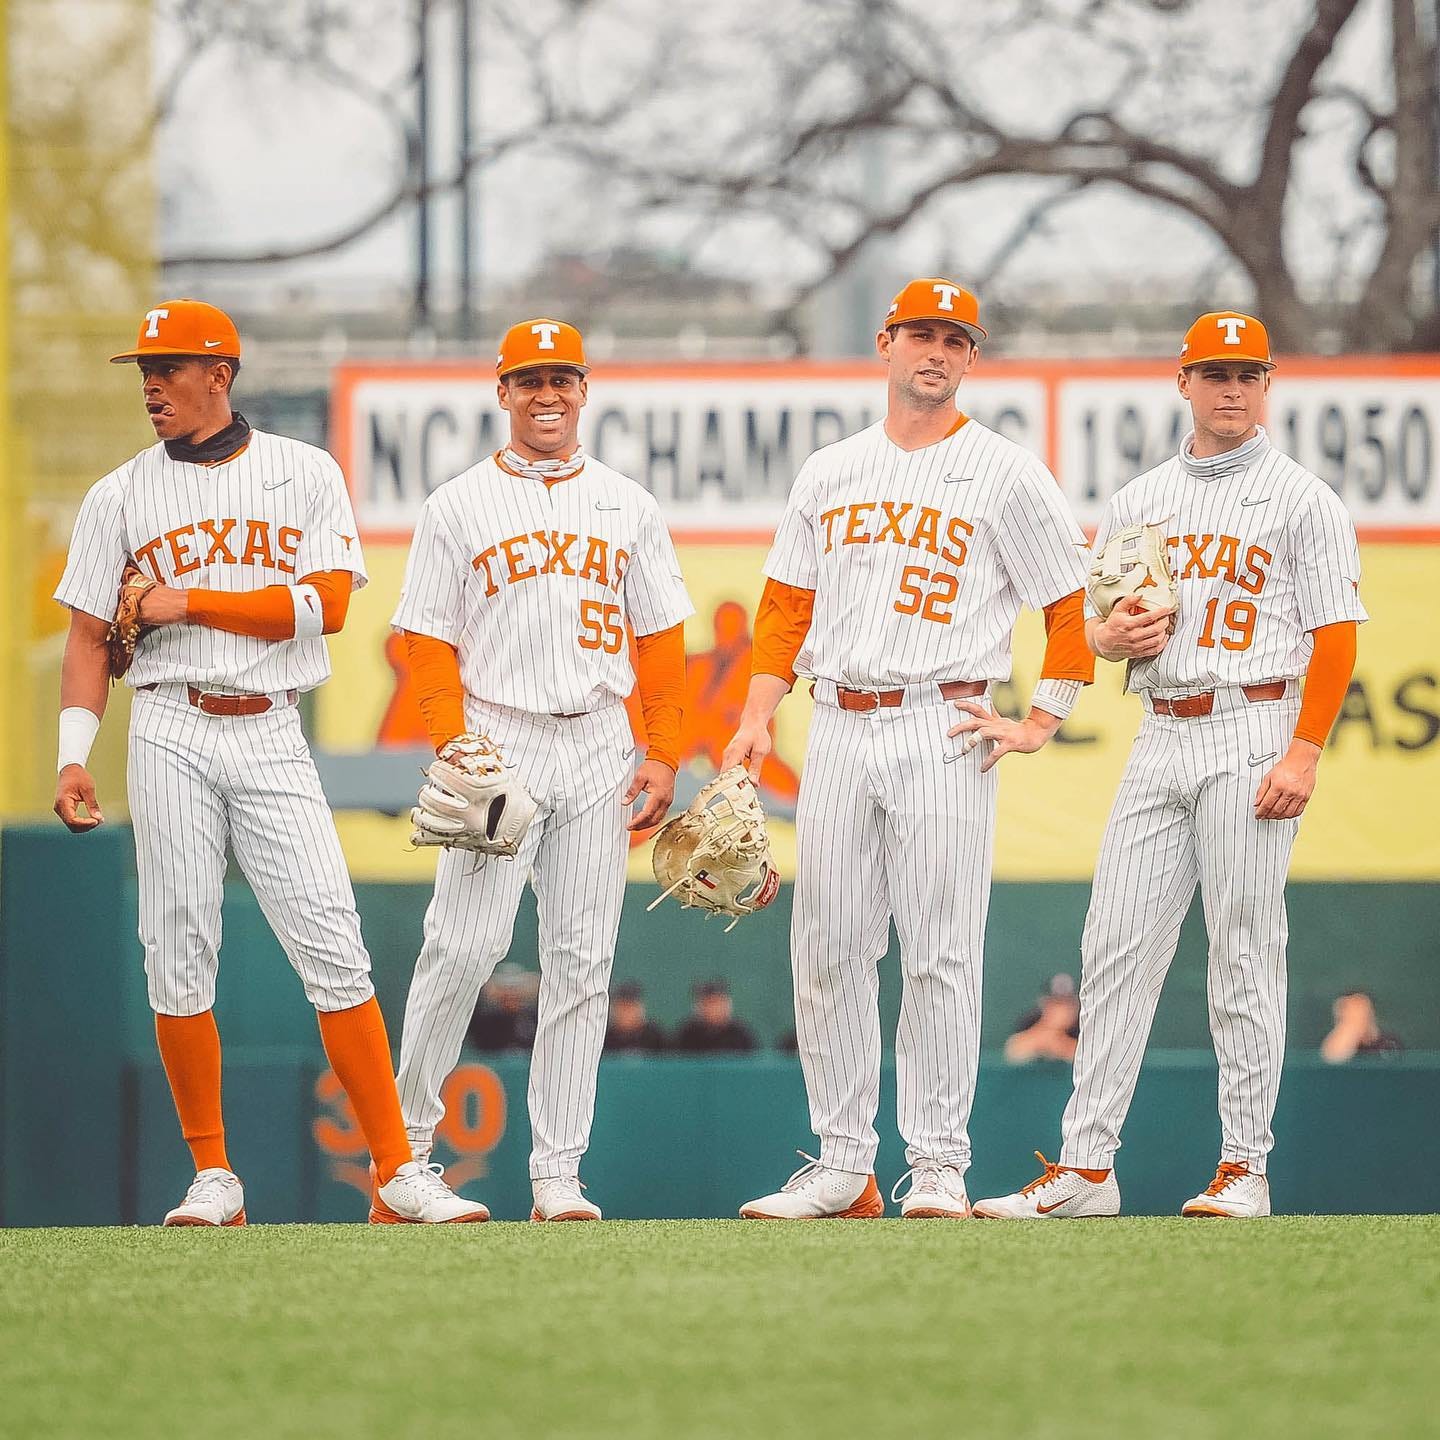 Join Texas Athletics in giving the Horns a Texas-sized send-off as they  depart for their record 37th College World Series Appearance | KOKE FM